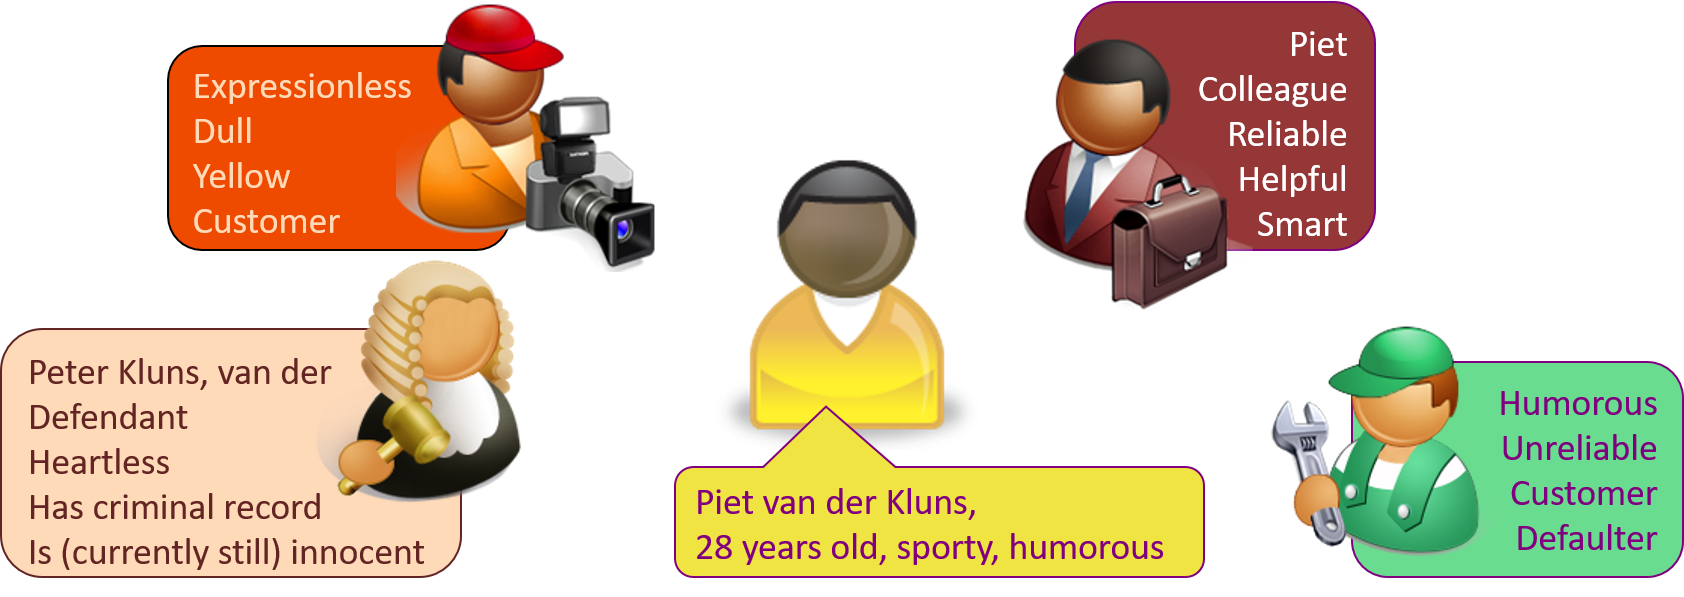 Various partial identities for subject Piet van der Kluns, including a self-identity